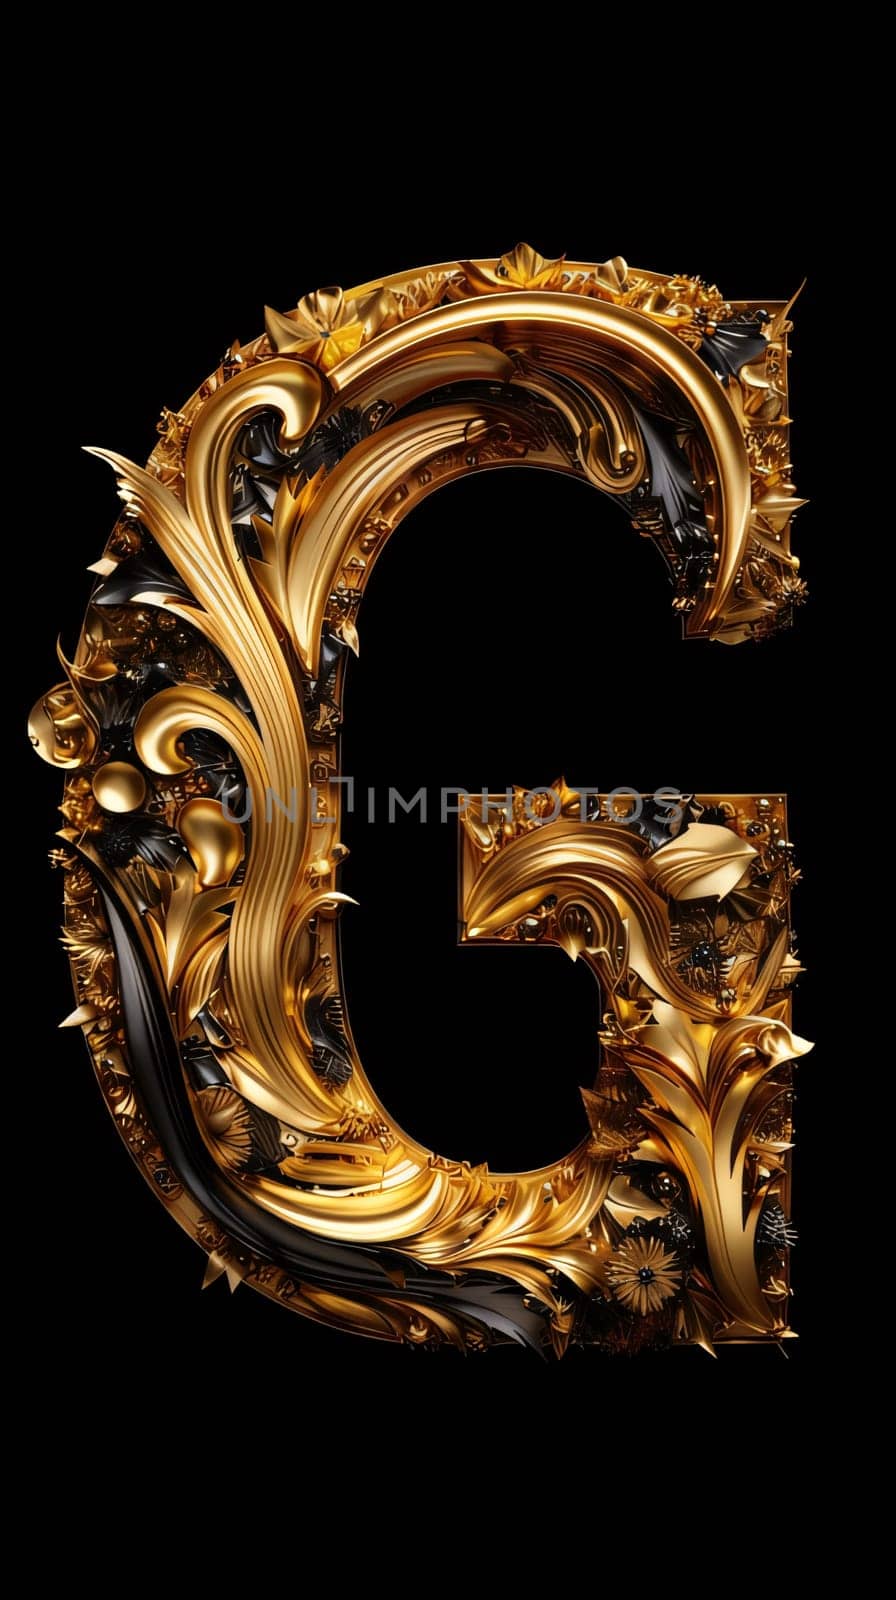 Graphic alphabet letters: 3d letter G made of gold in the style of Baroque